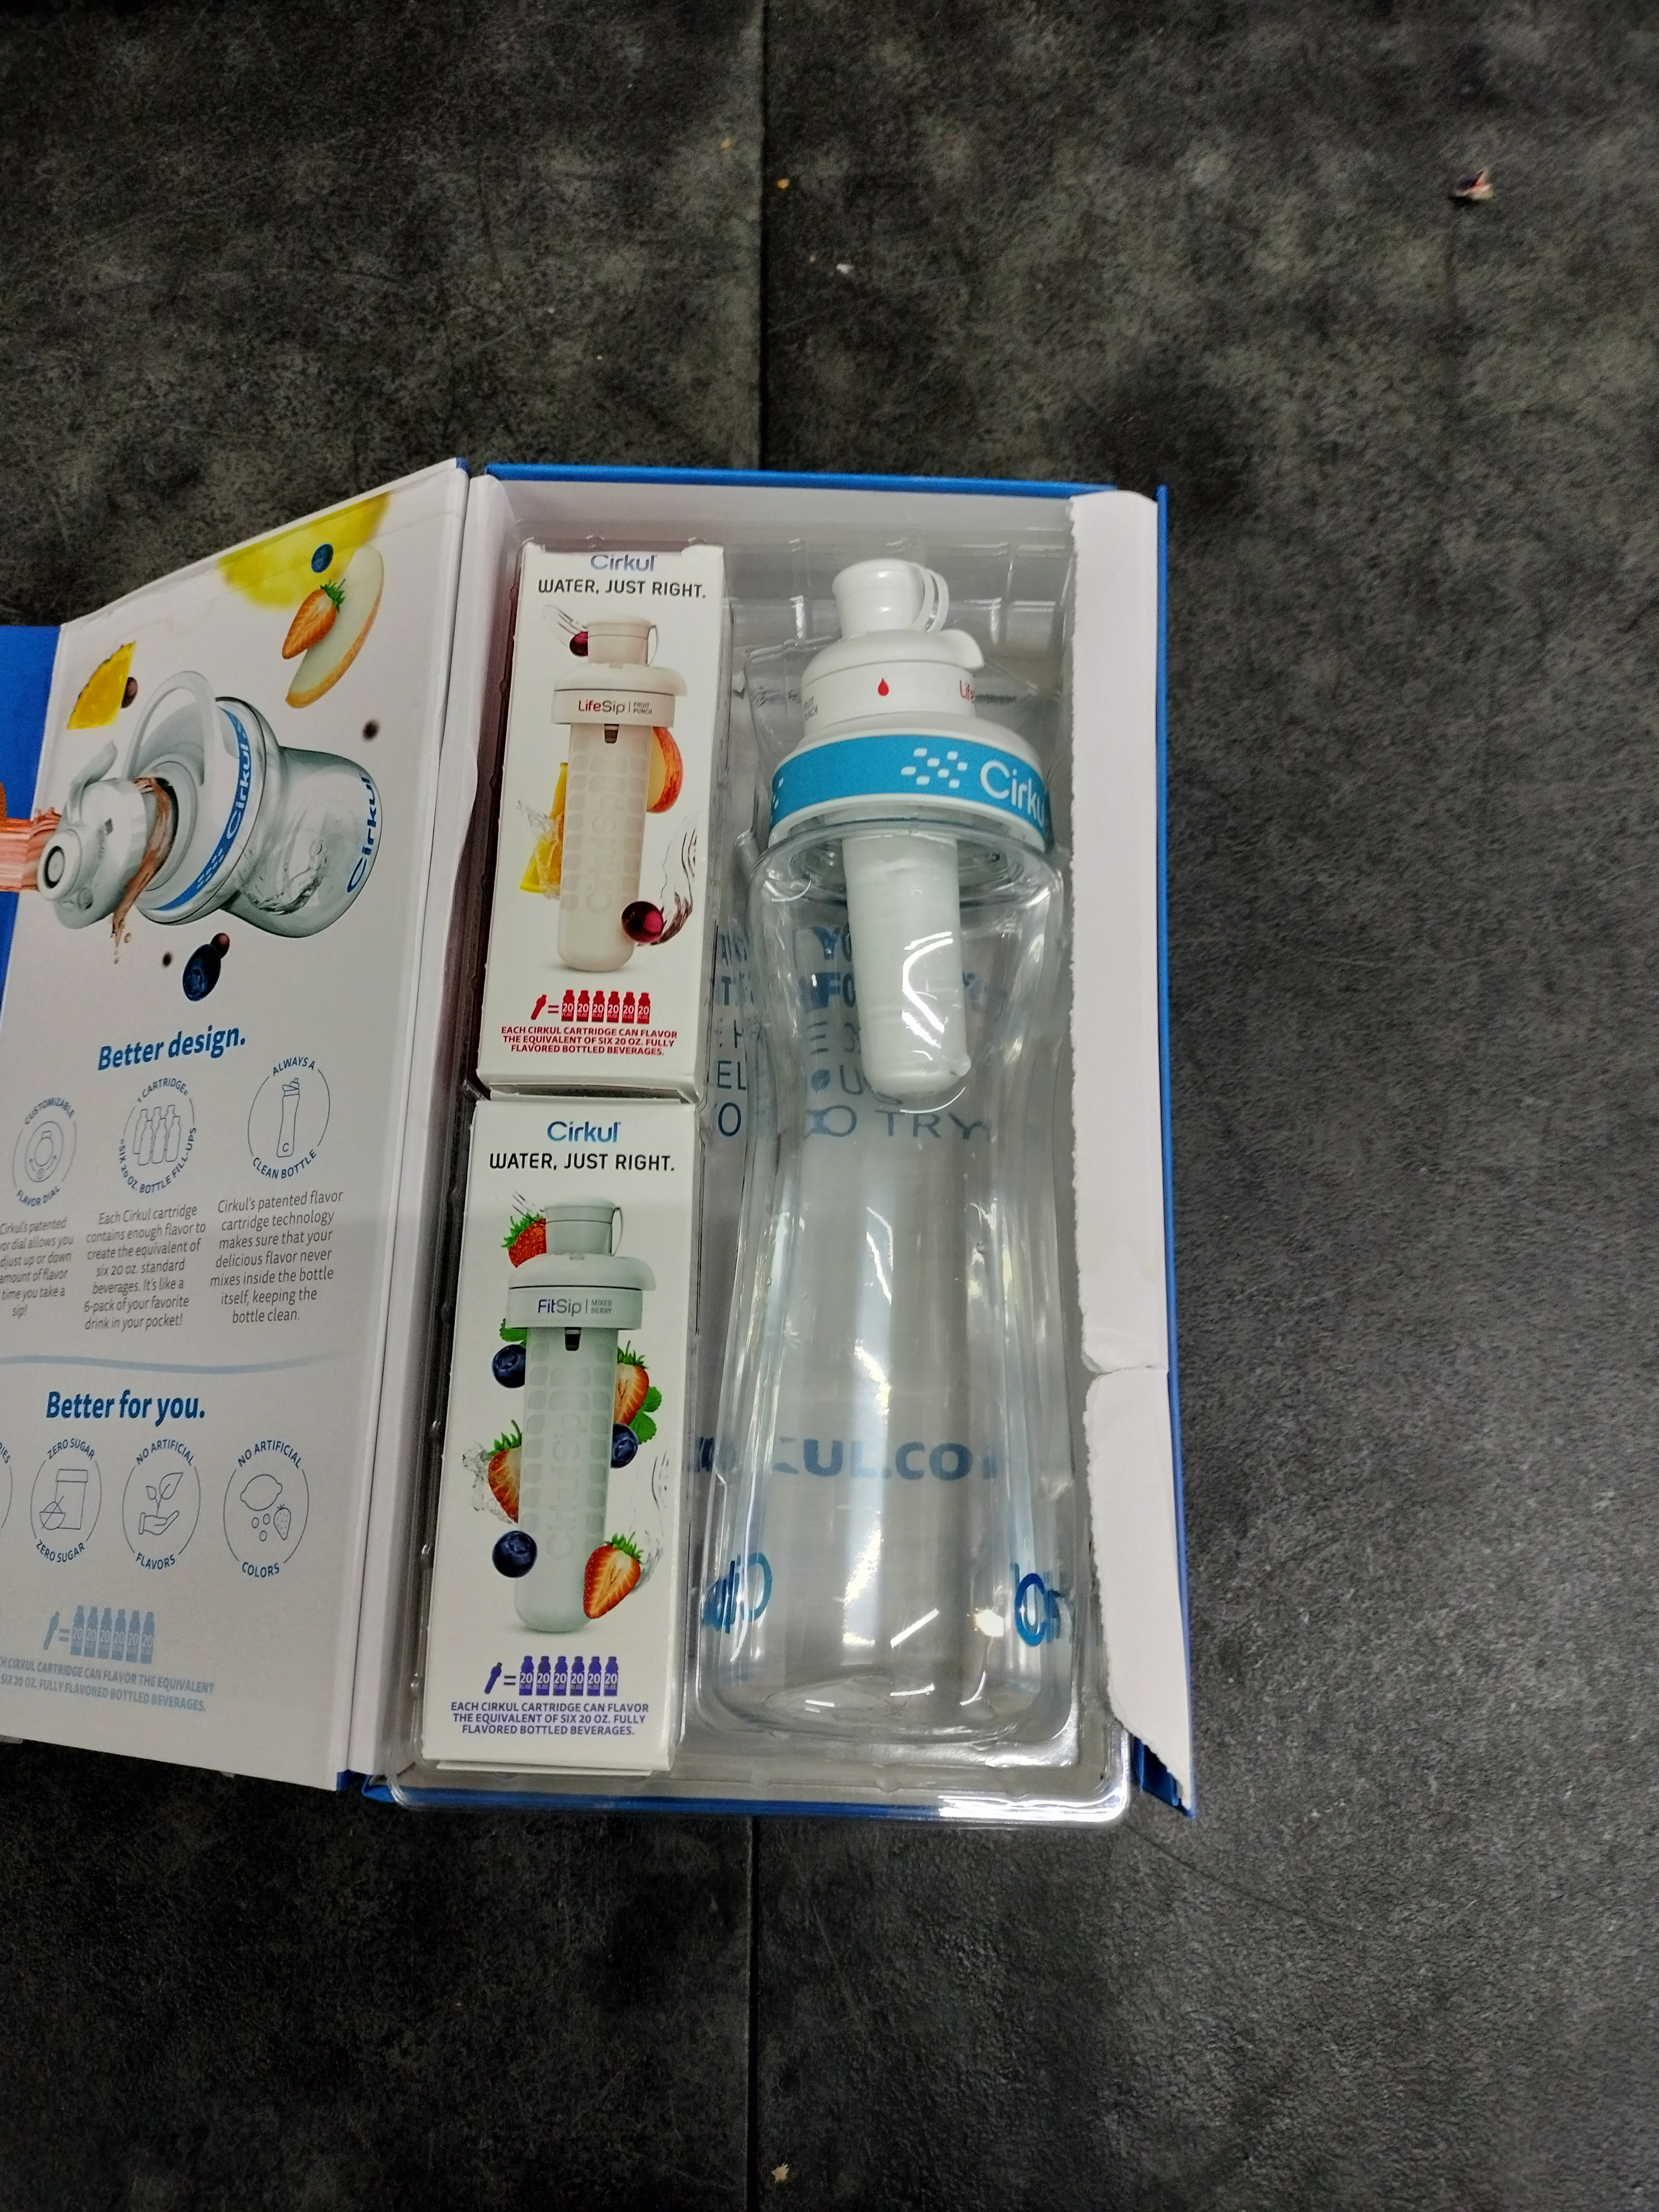 Cirkul 12 oz Plastic Water Bottle Starter Kit with Blue Lid and 2 Flavor  Cartridges (Fruit Punch & Mixed Berry)